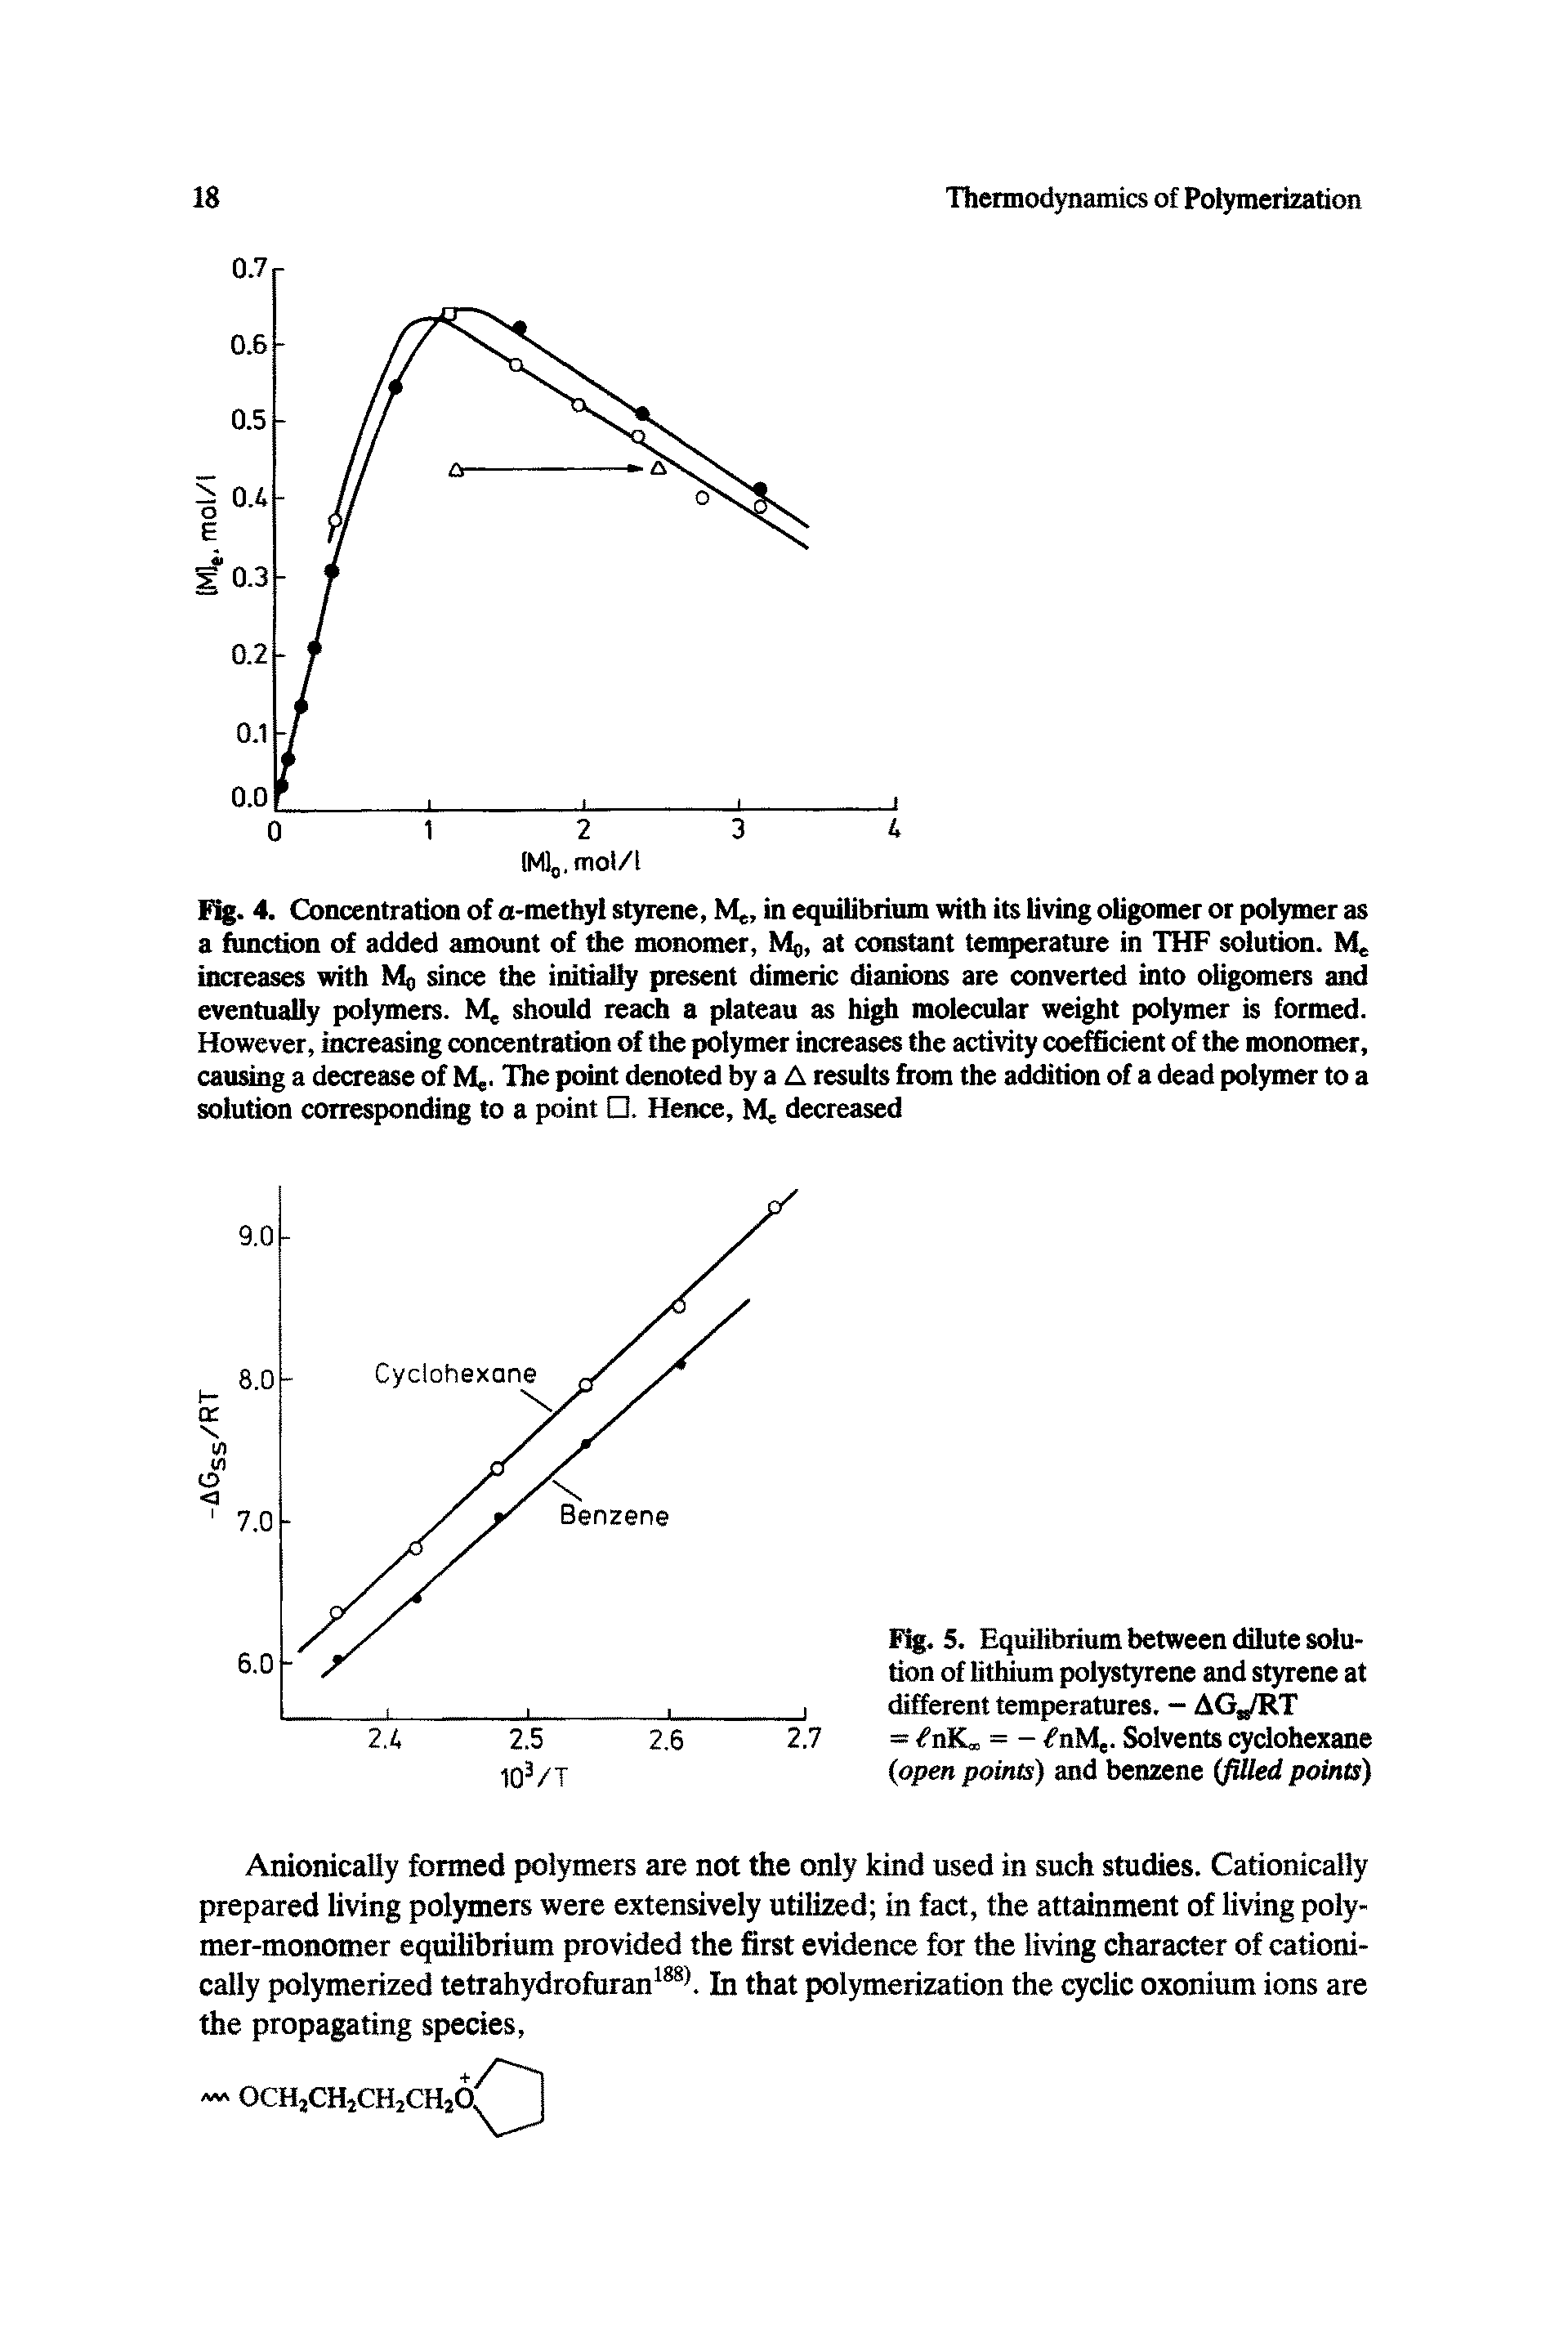 Fig. 5. Equilibrium between dilute solution of lithium polystyrene and styrene at different temperatures. - AG,/RT = nJC, = - nMe. Solvents cyclohexane (open points) and benzene (filed points)...